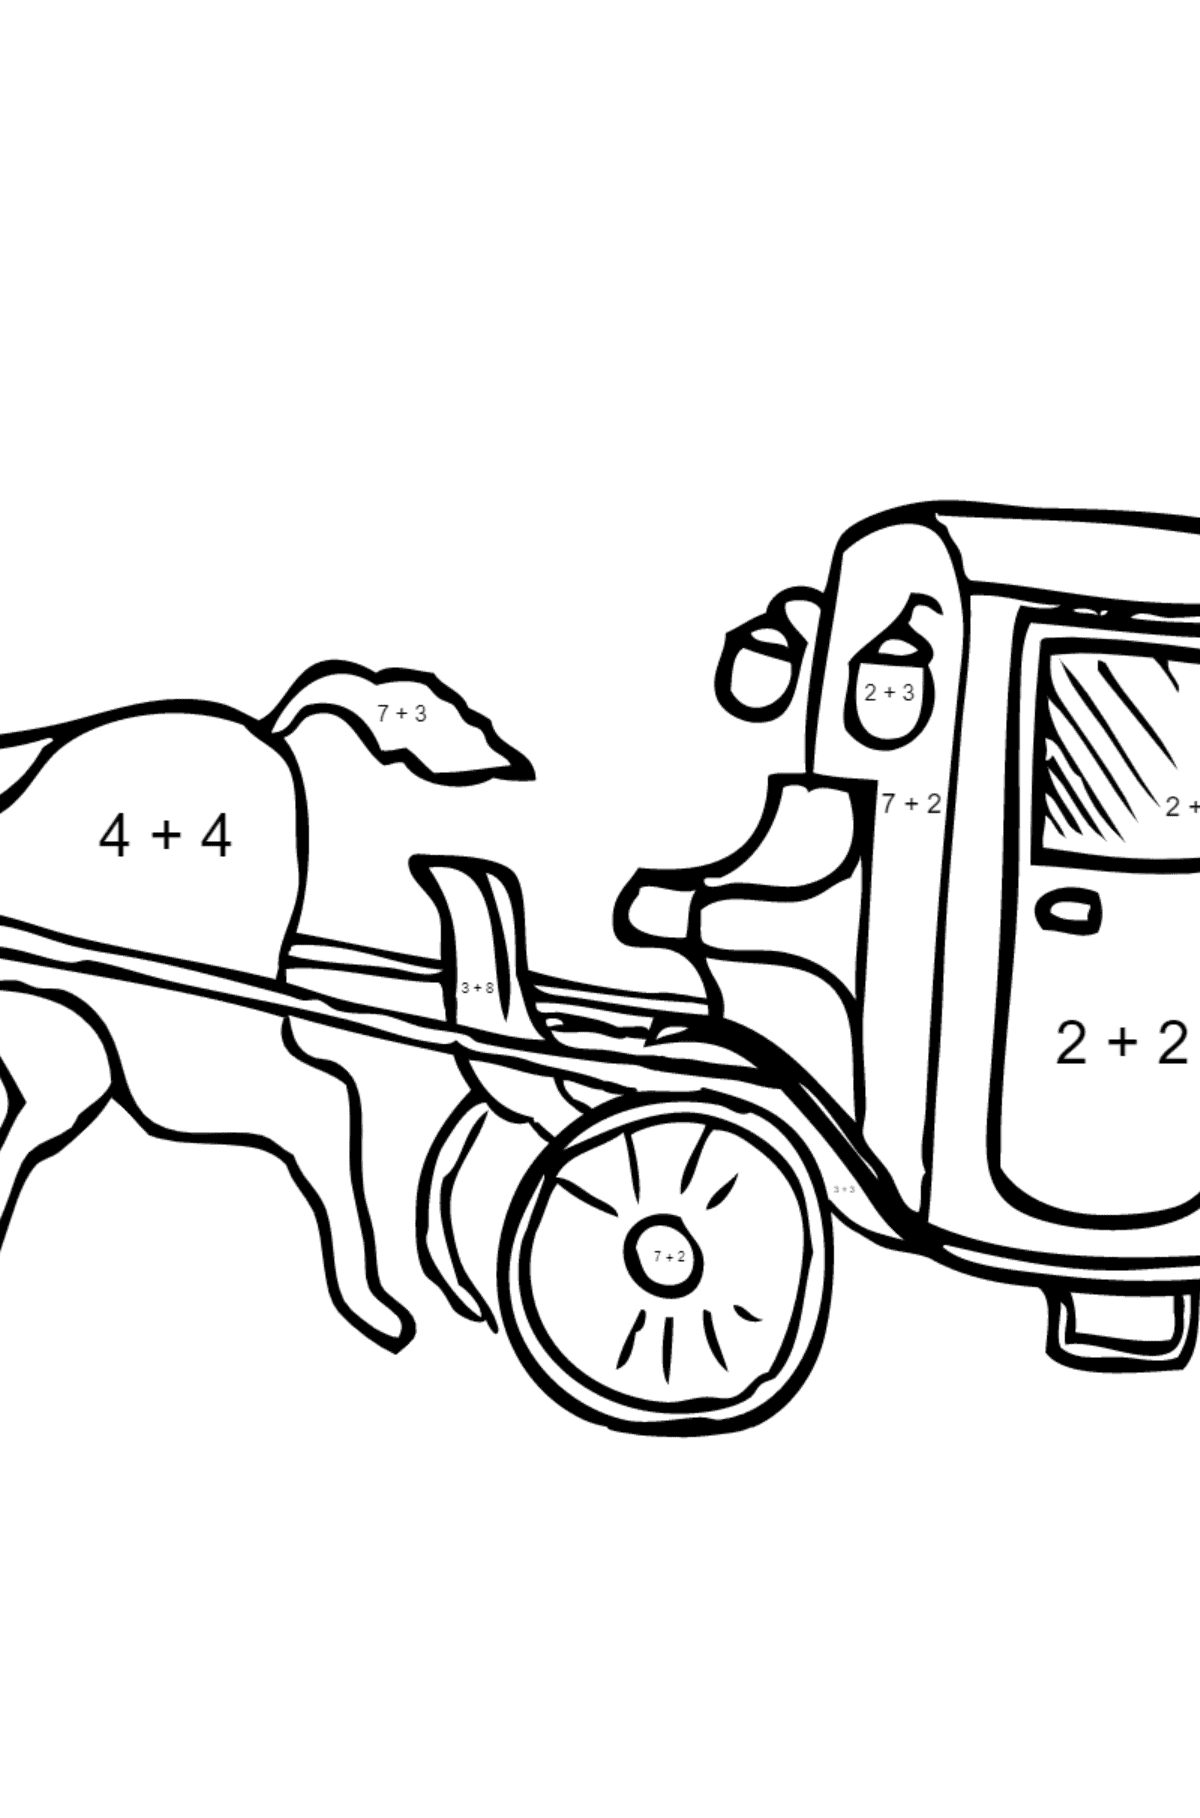 Coloring Page - A Cab - Math Coloring - Addition for Kids